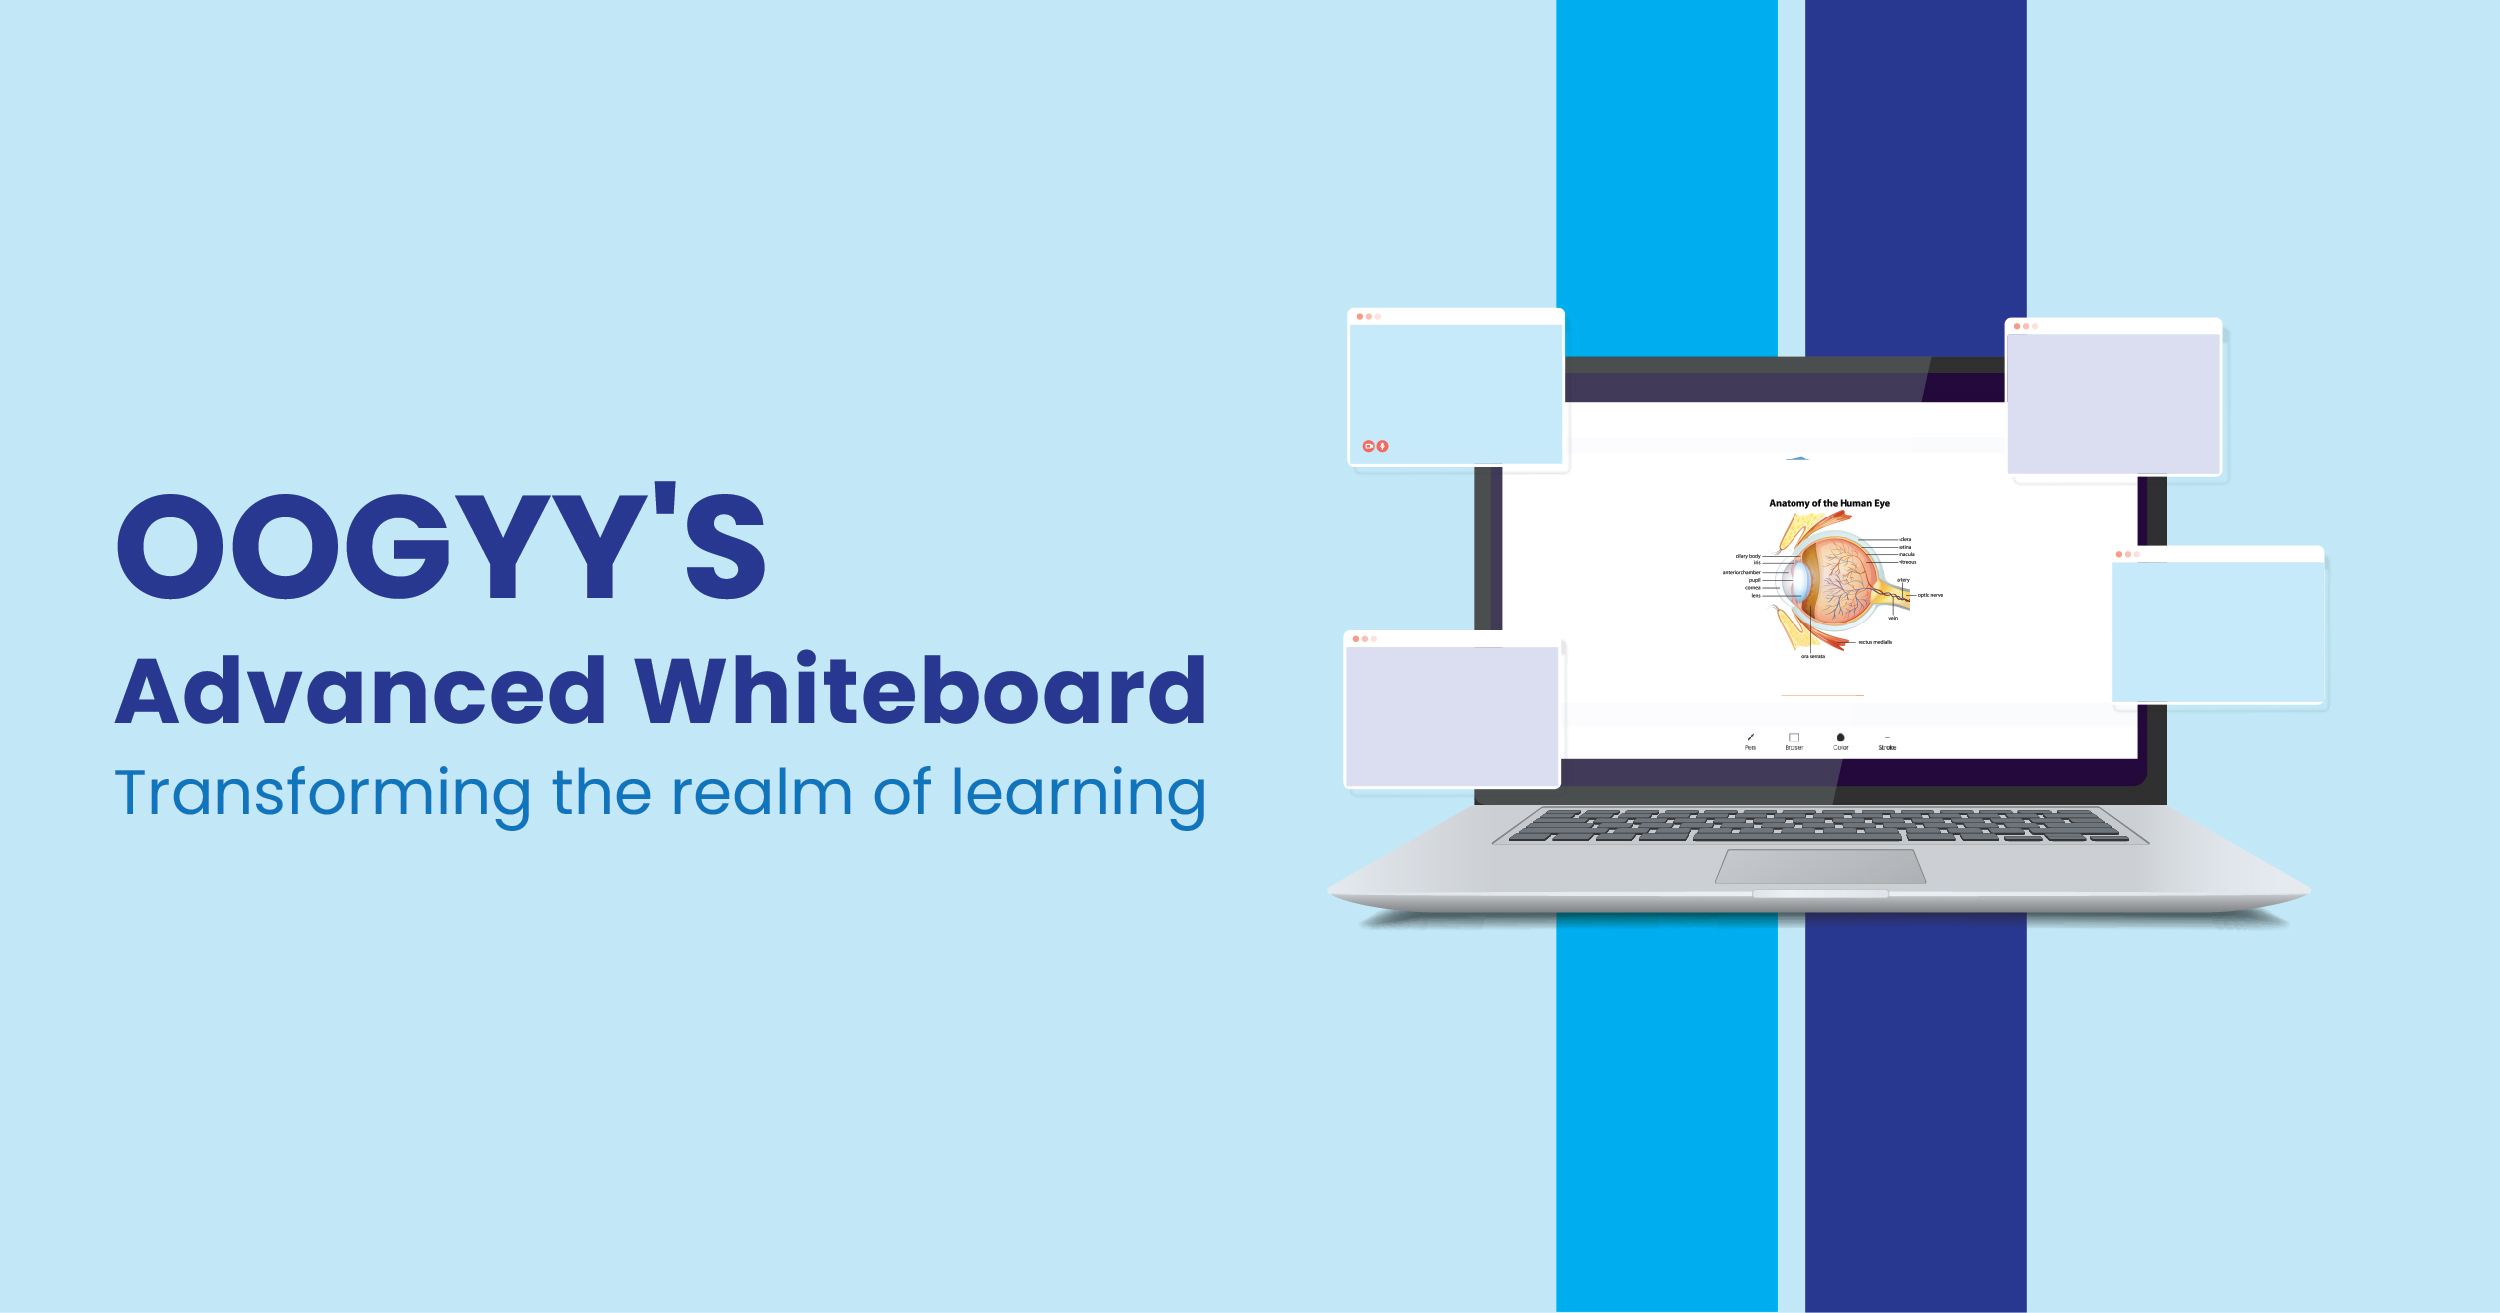 How Oogyy whiteboard is leading the change in the education sector